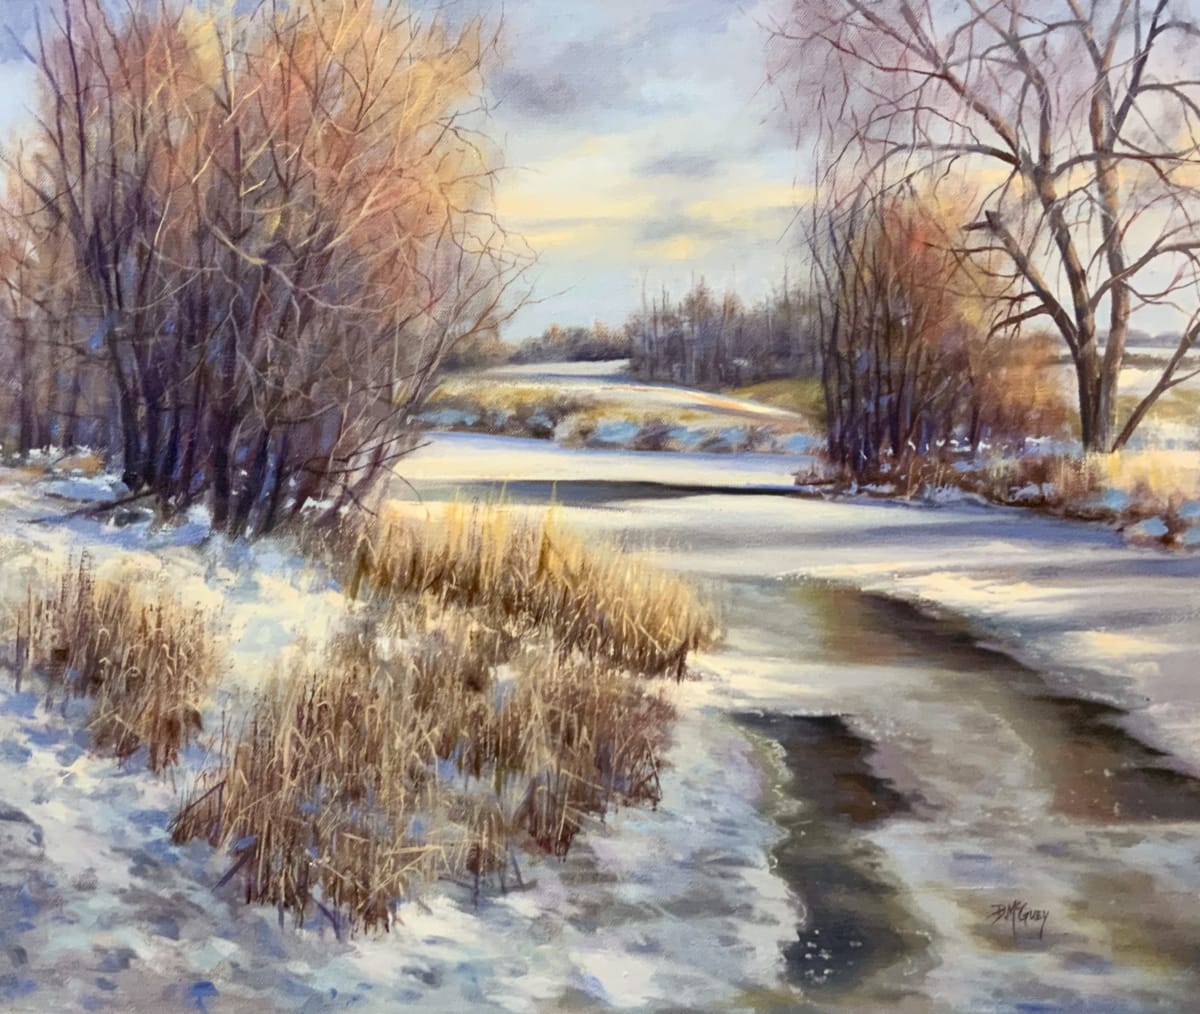 Freshet Beginning by Barbara McGuey  Image: A location called Hoards Landing near Stirling Ontario. The light near sundown is soft and the mood is quiet. Thoughts of the coming season are on the horizon!